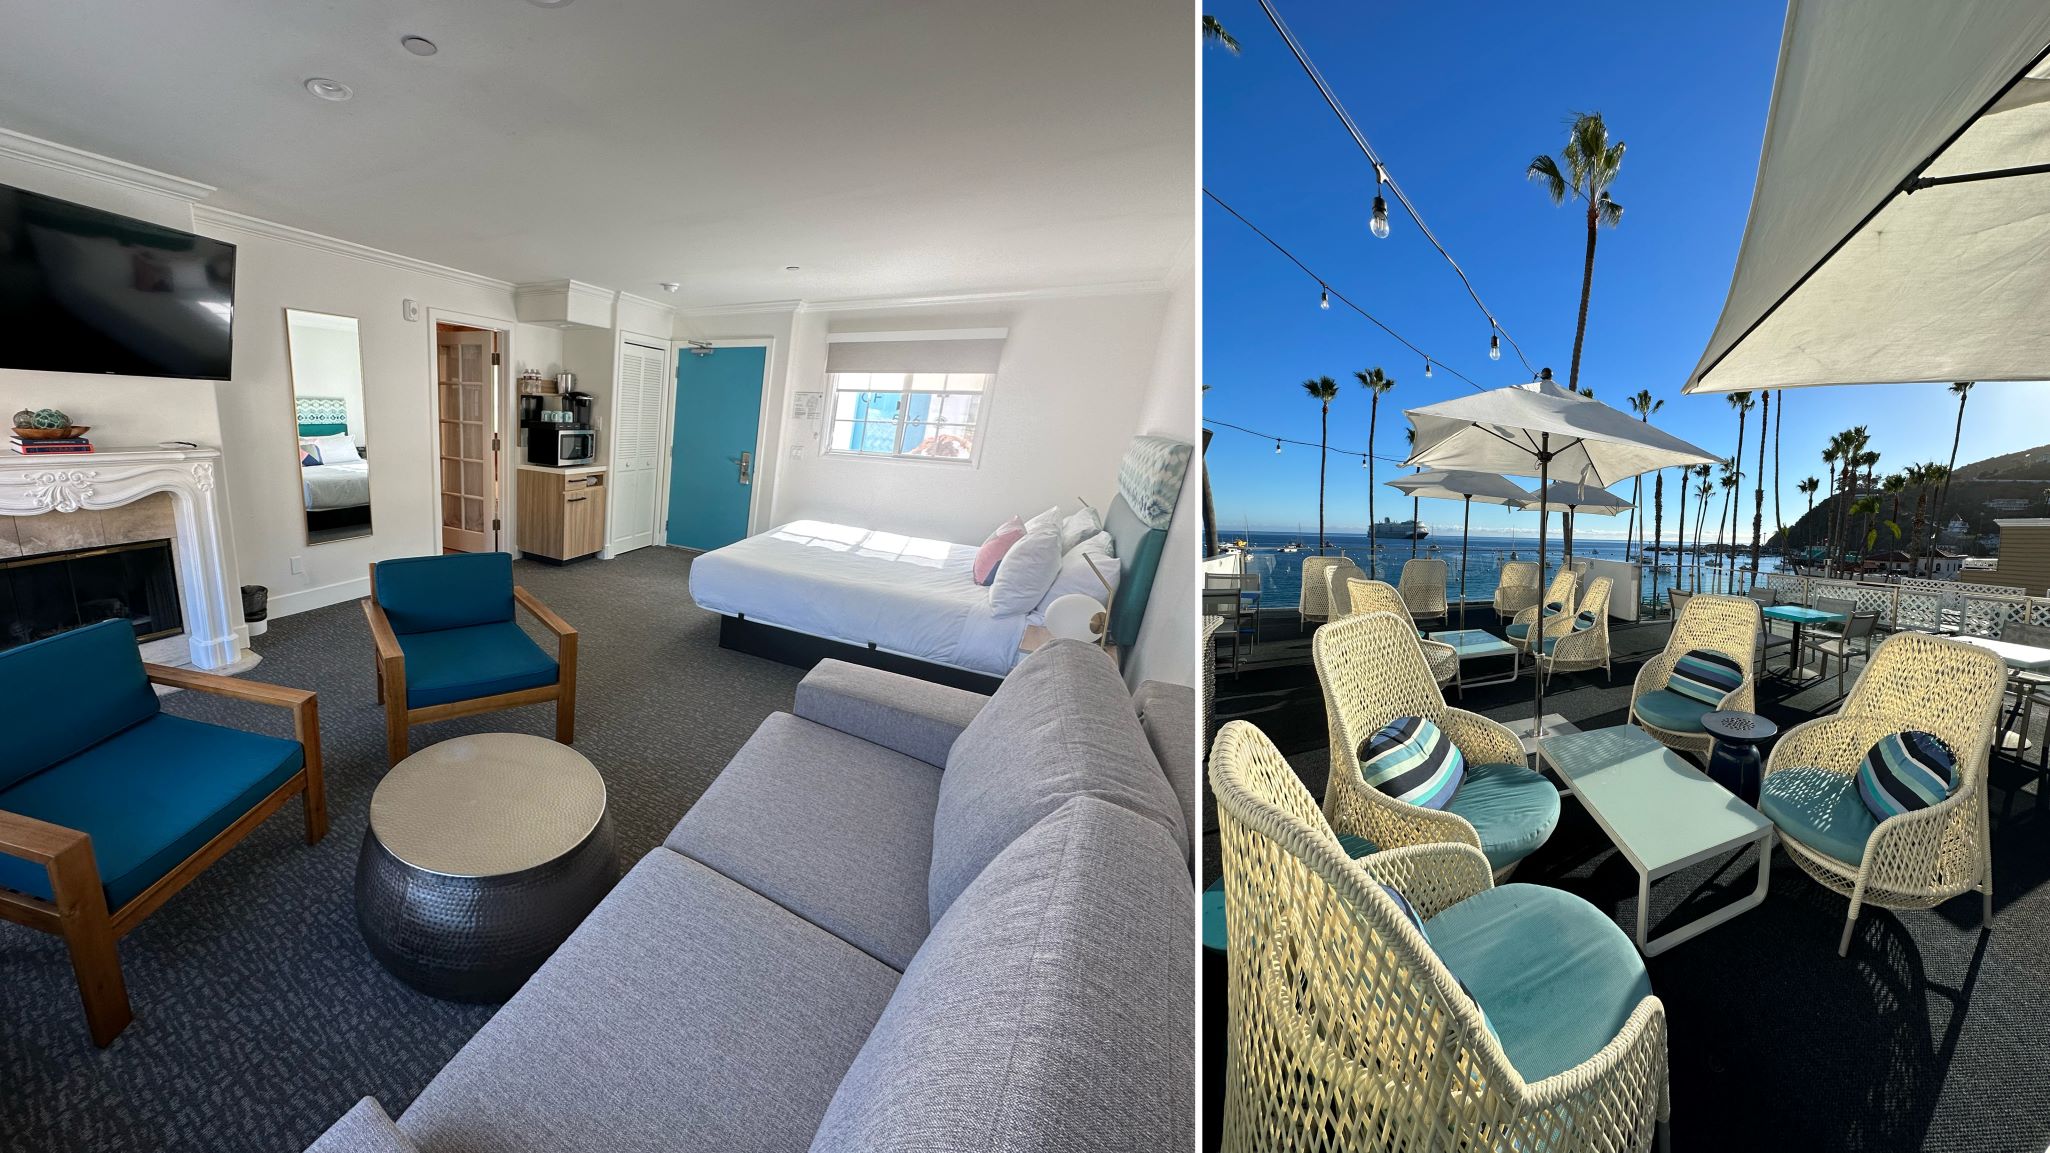 An image of a Bellanca Hotel room and the Bellanca rooftop lounge.